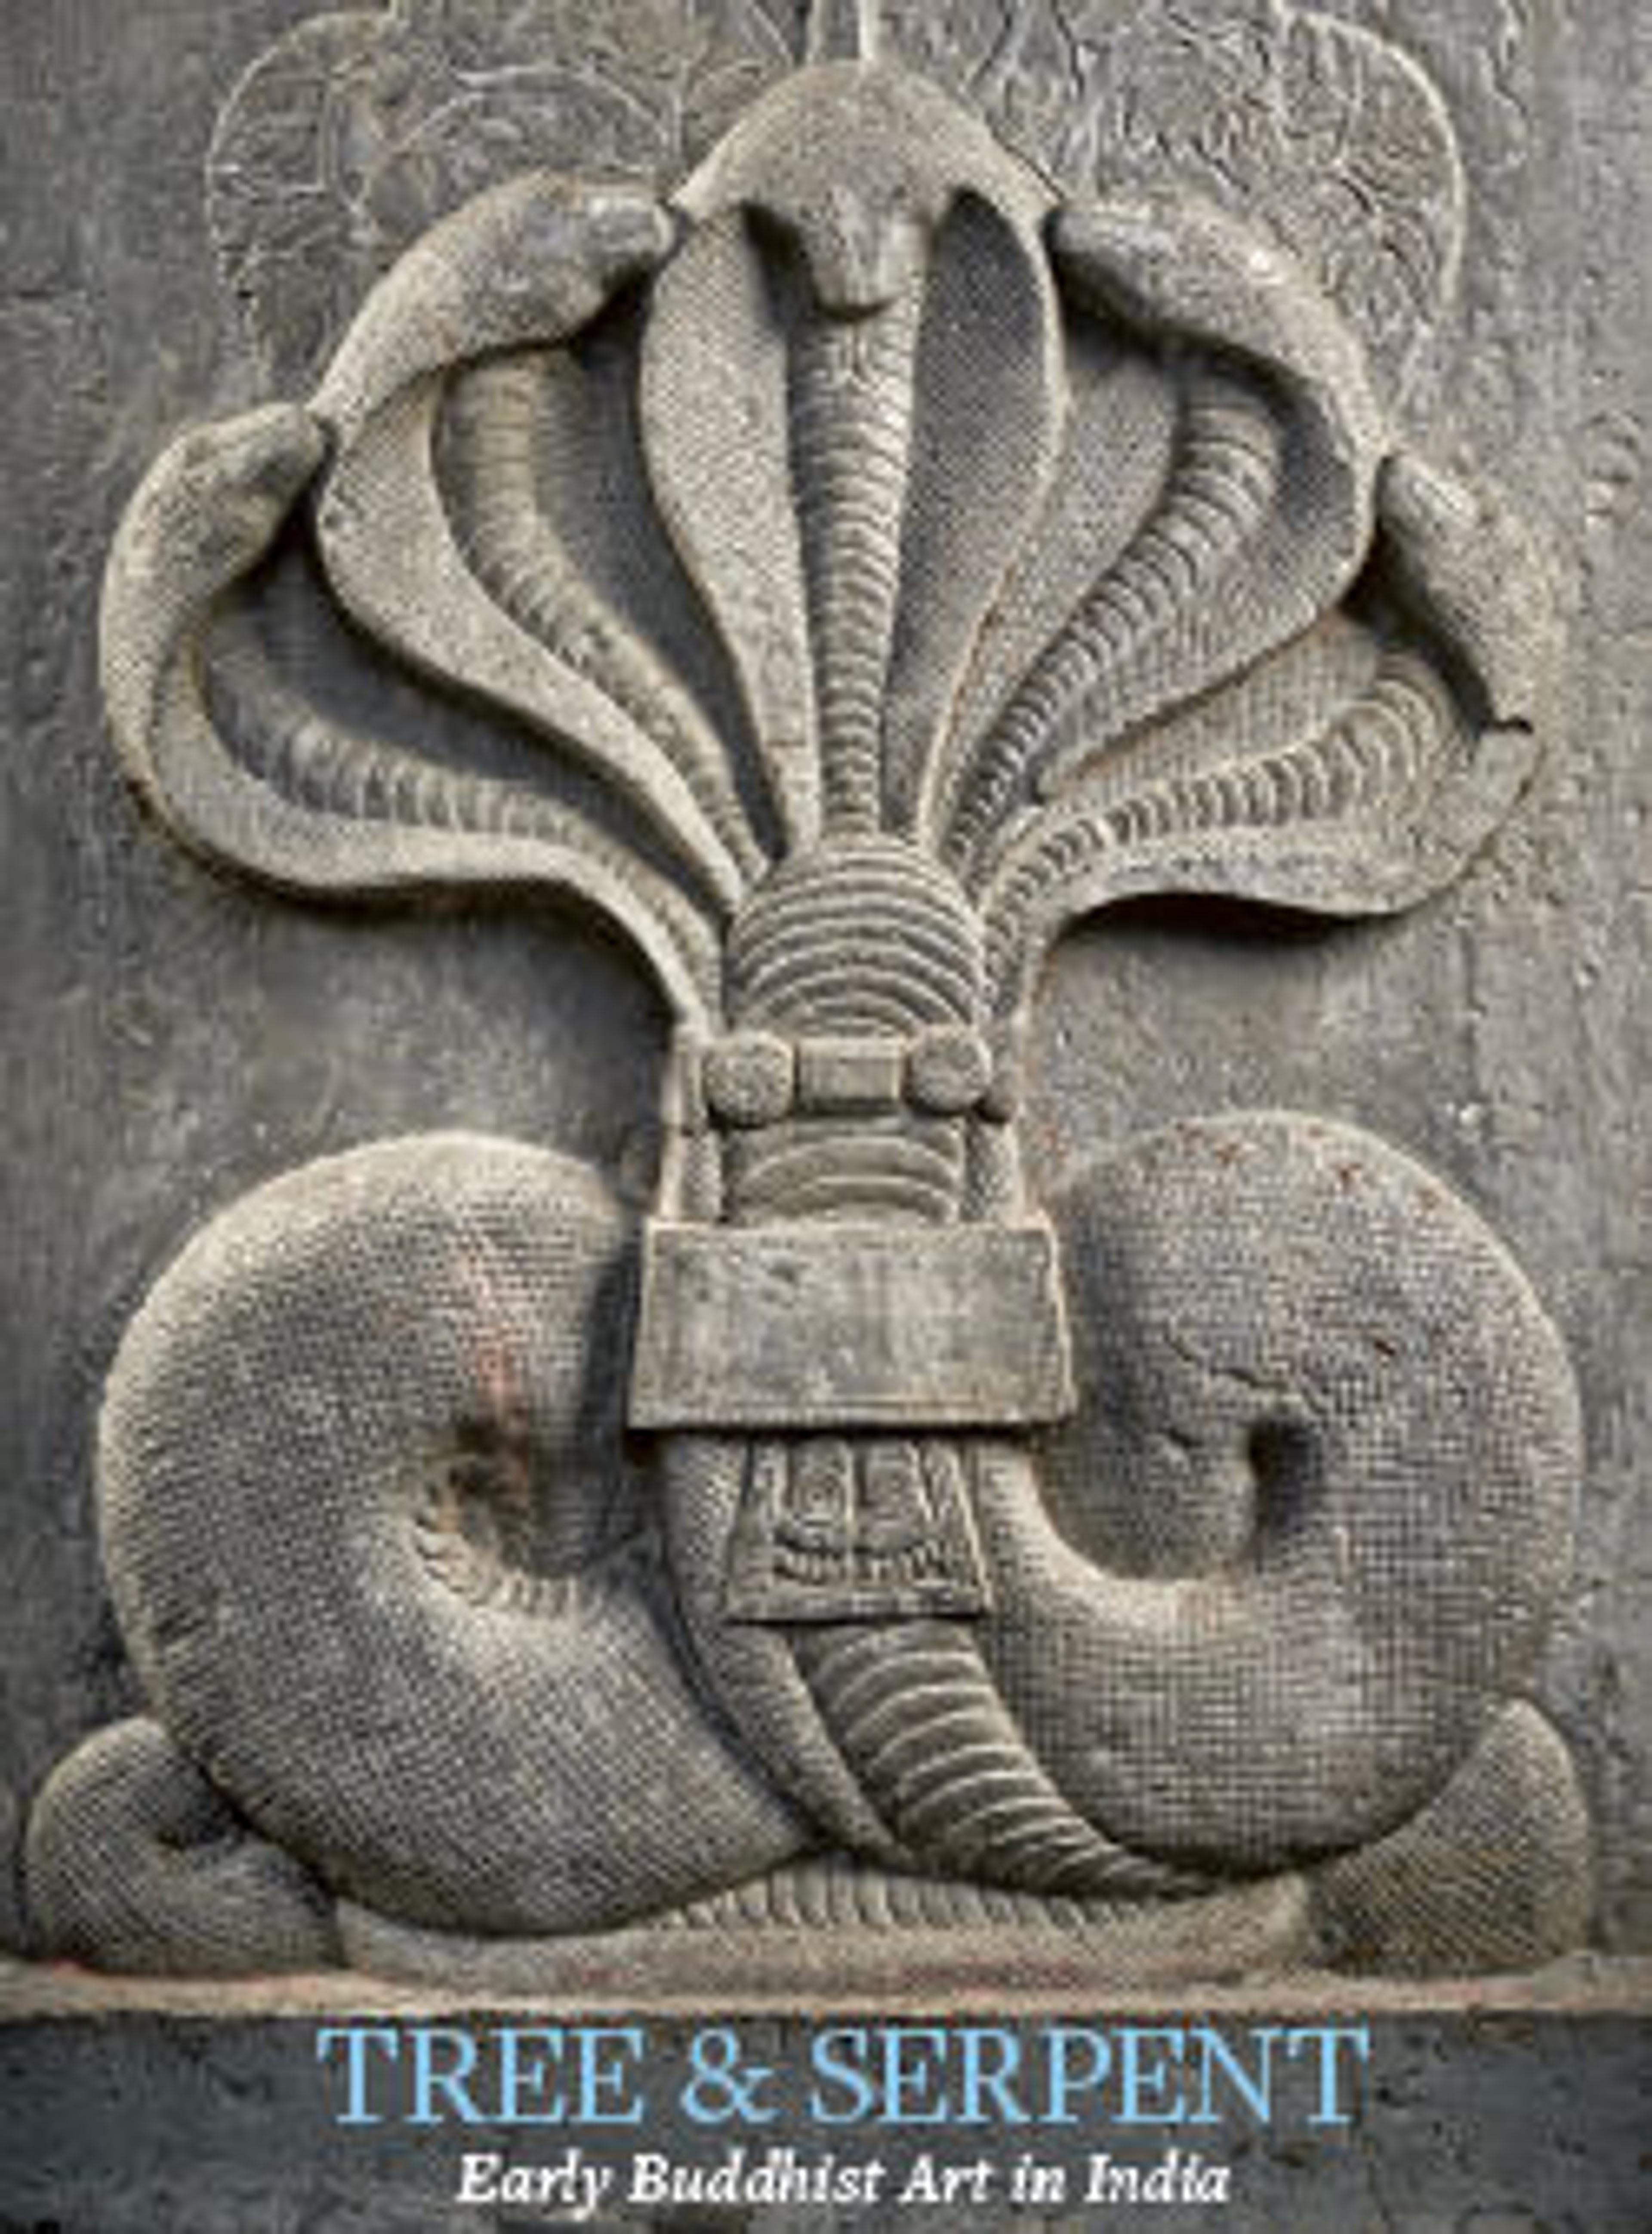 a stone carving of a majestic five-headed snake with leaves carved behind its heads